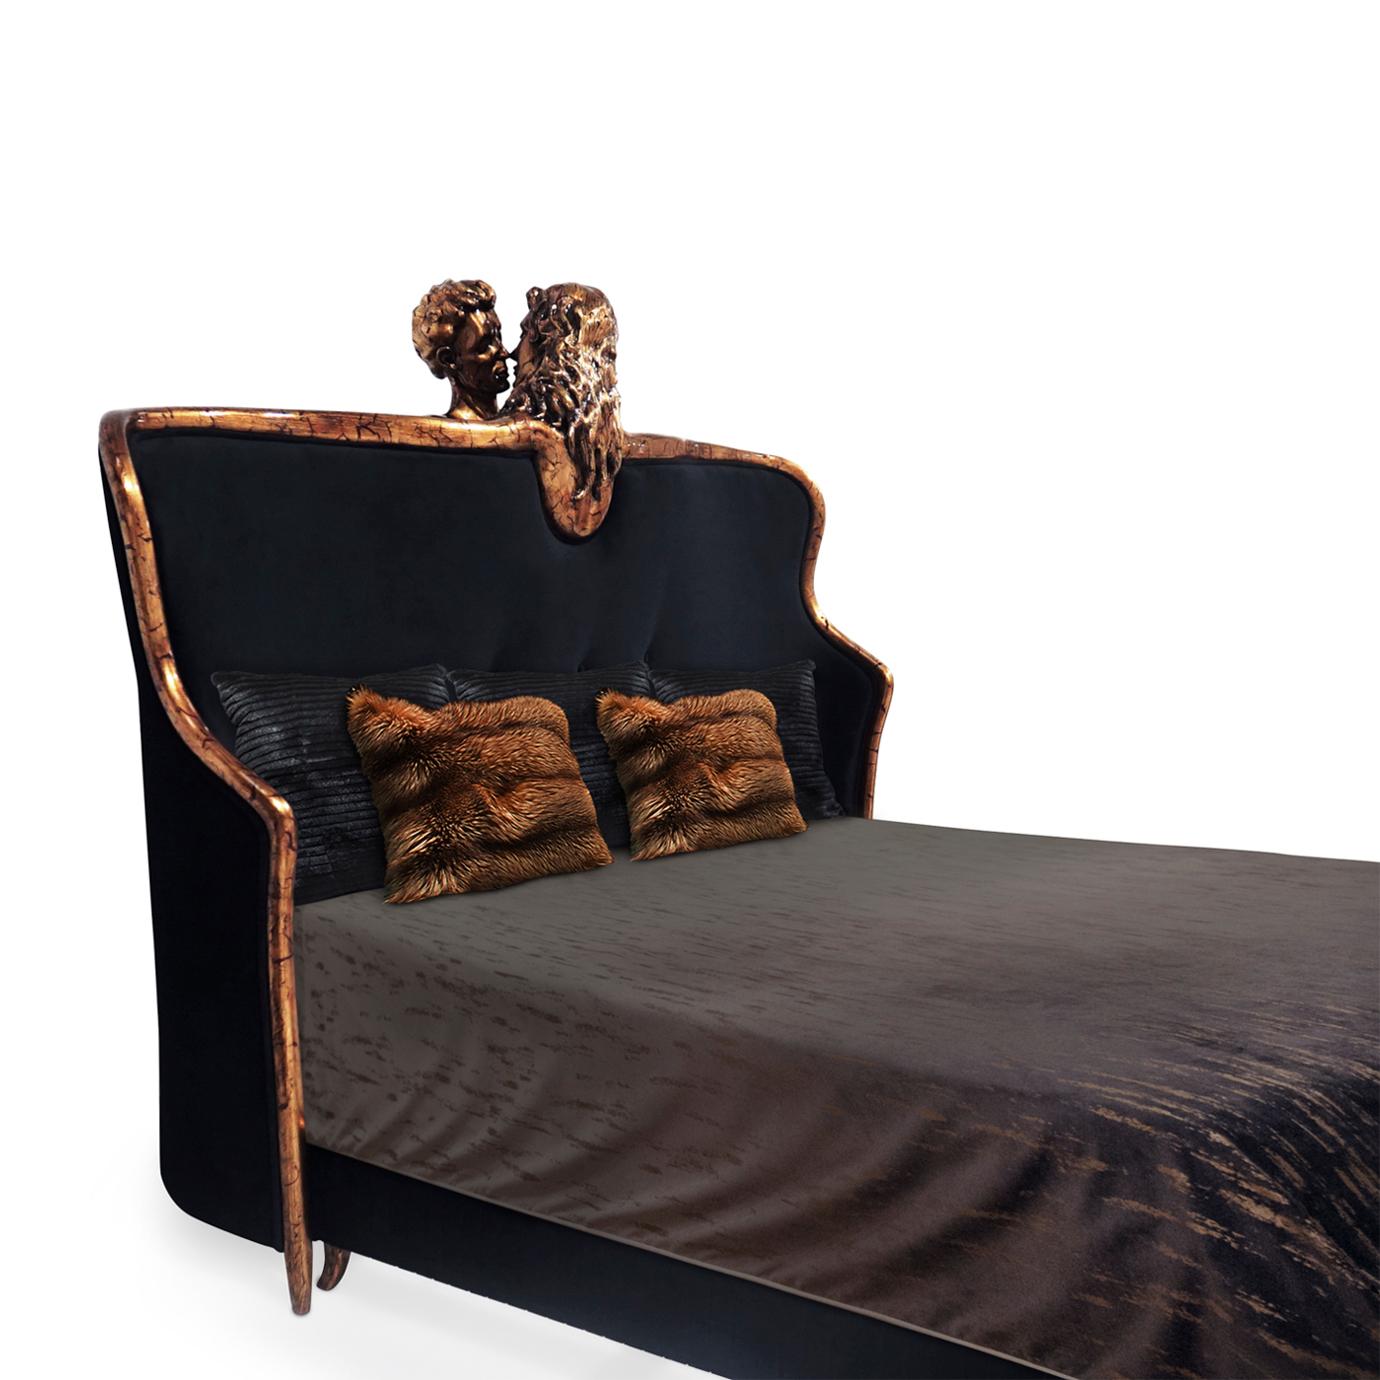 Portuguese Forbidden Black Bed Queen Size For Sale